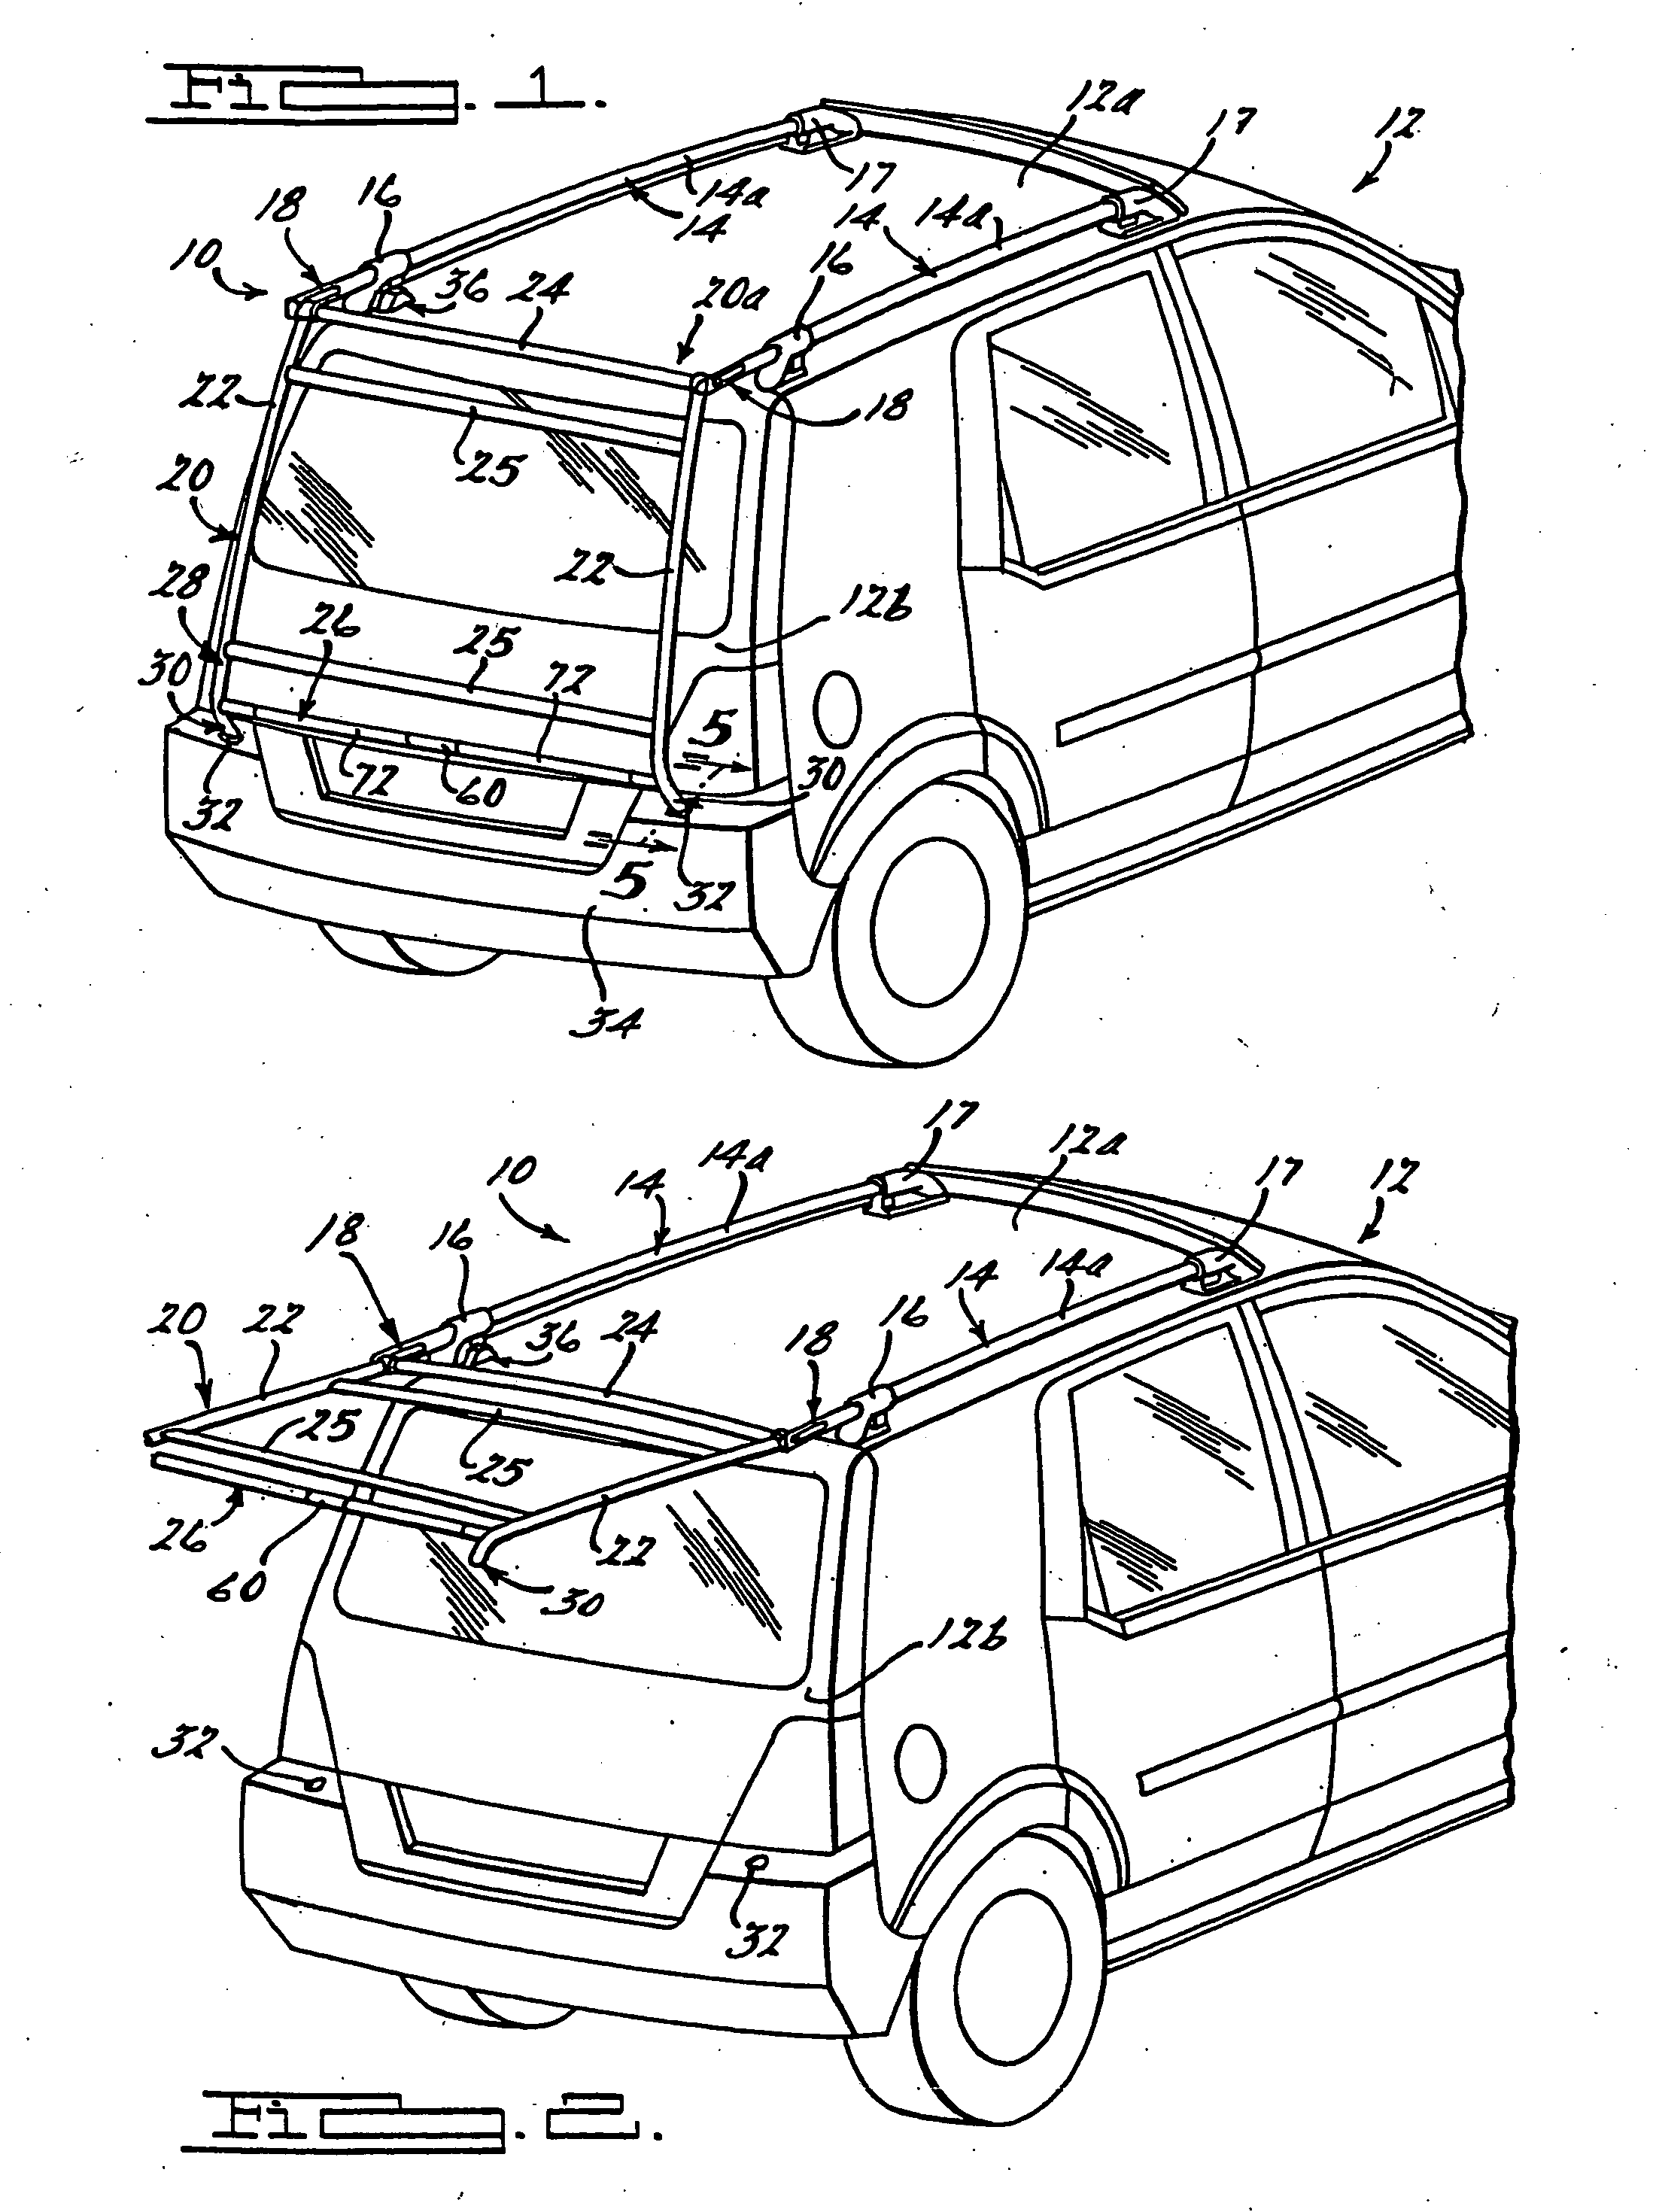 Vehicle article carrier having integral, moveable stowage bin